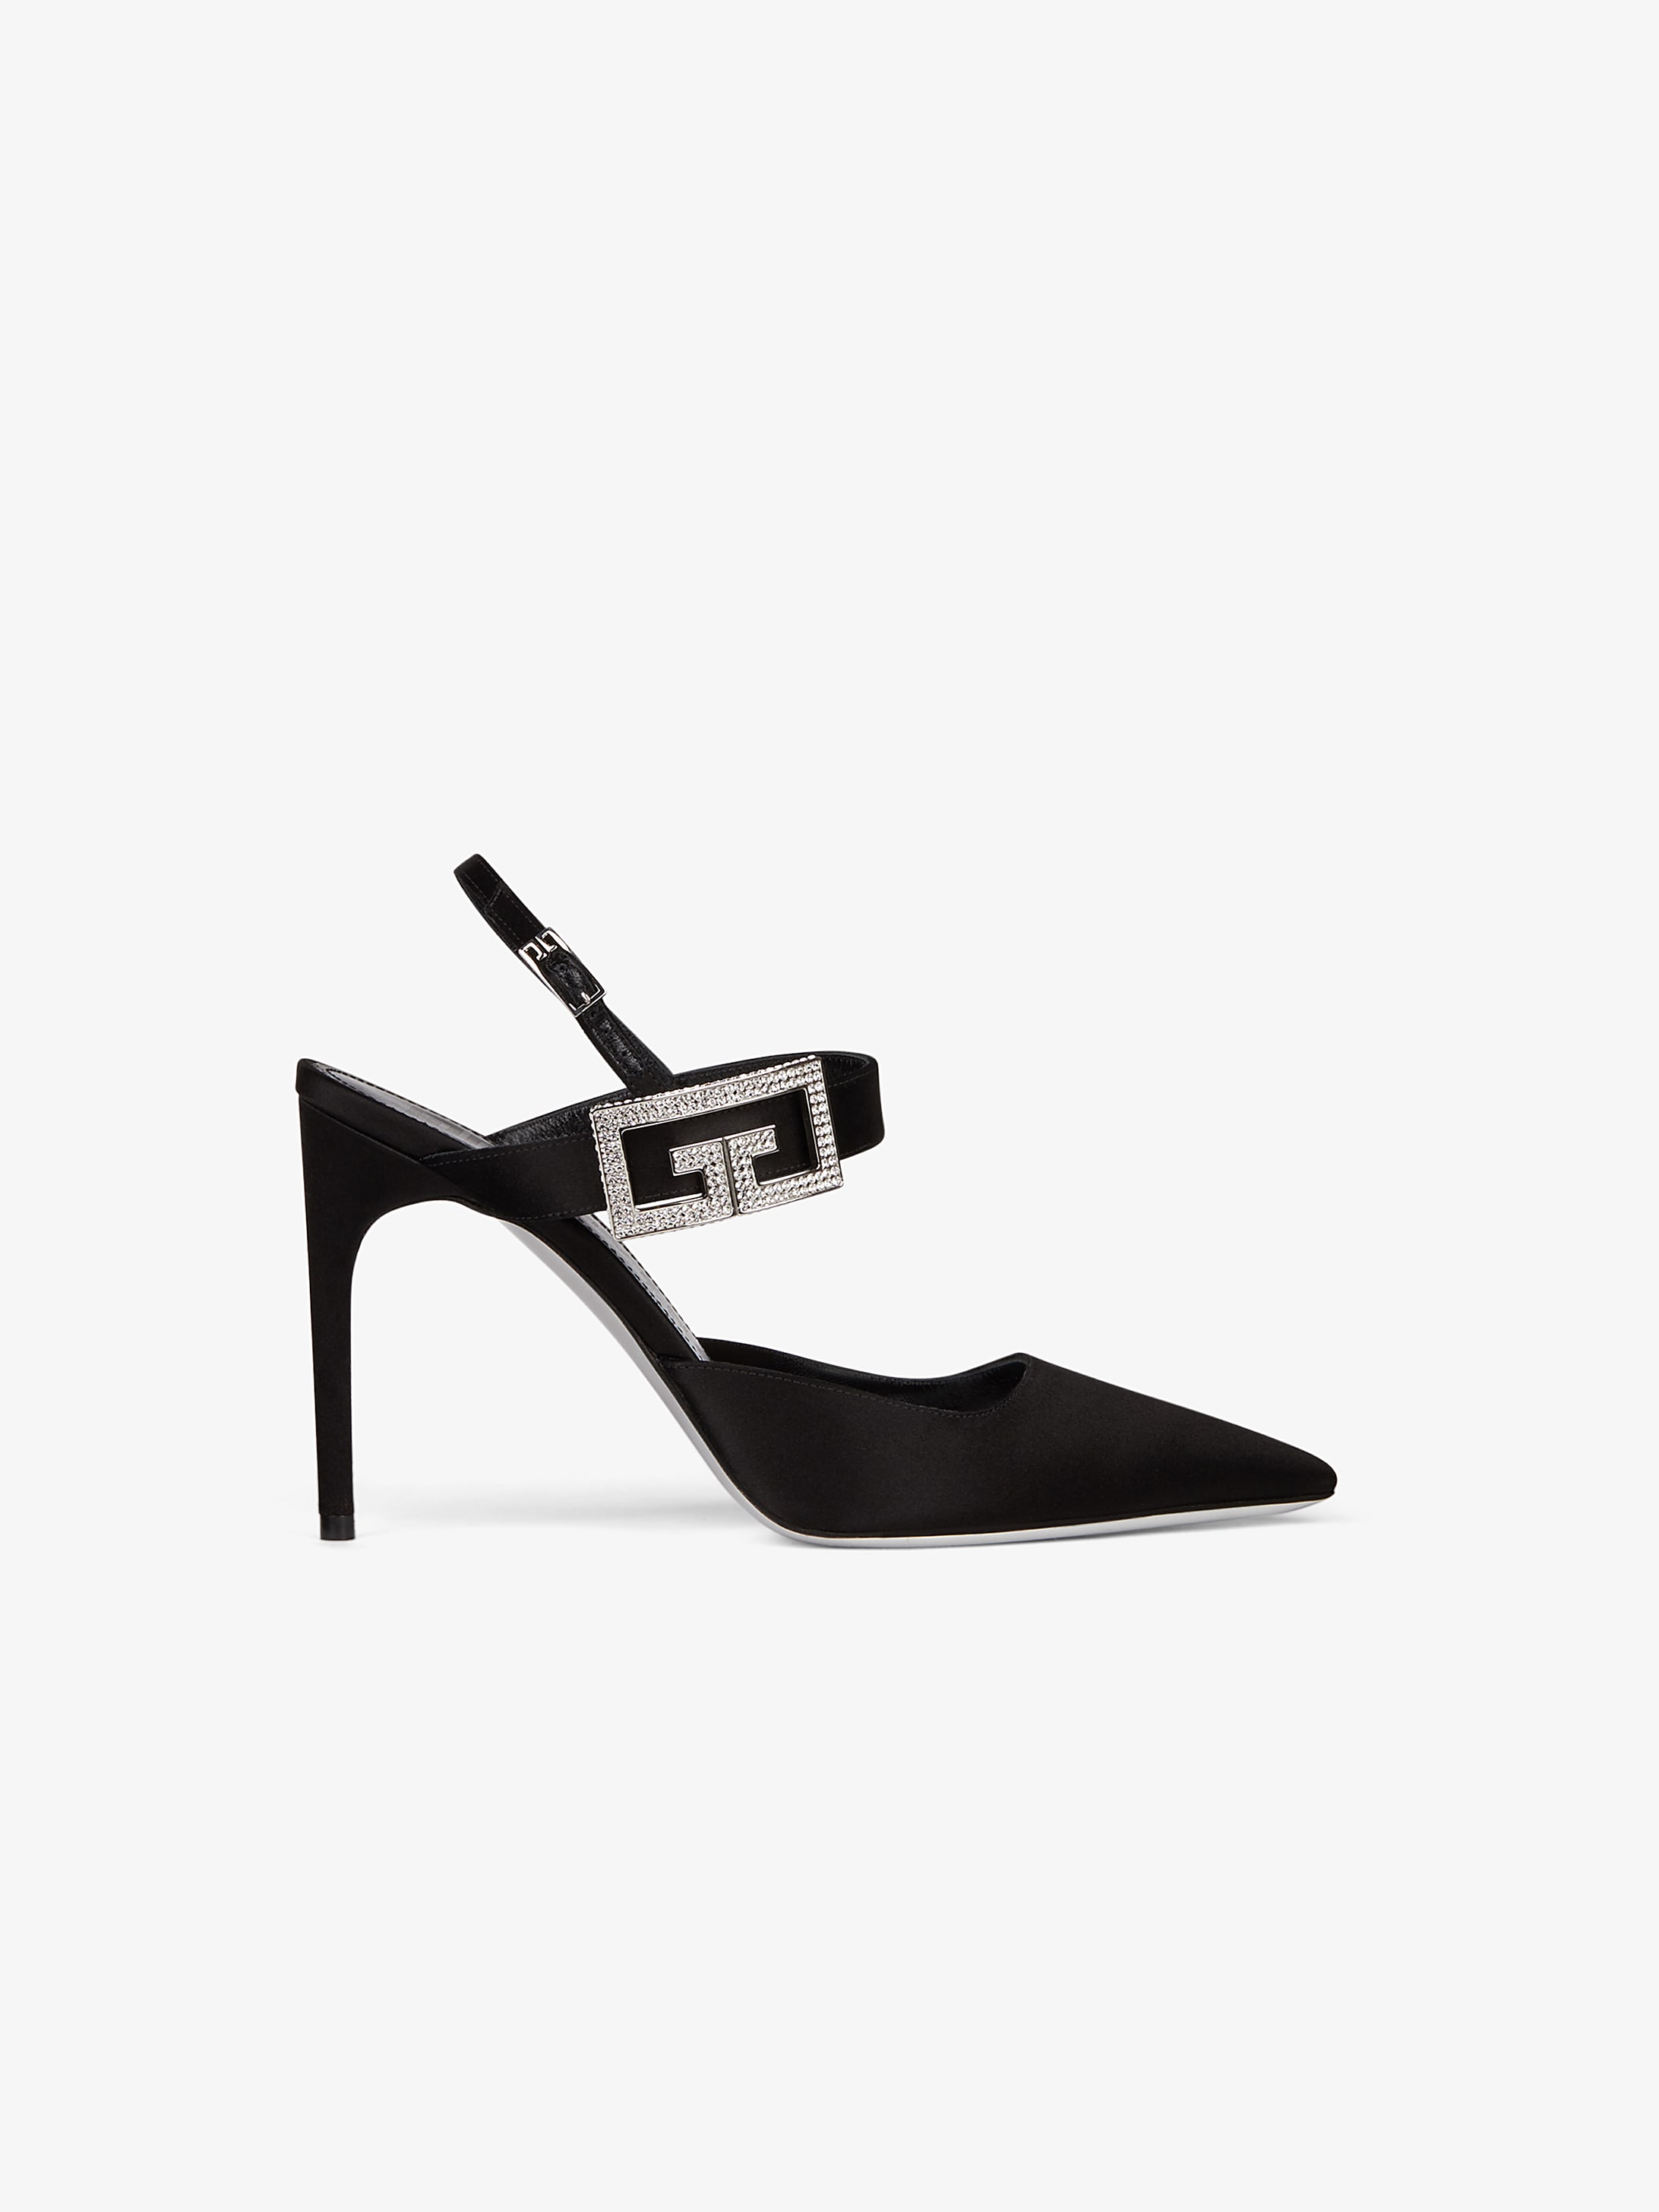 Double G buckle pumps in satin | GIVENCHY Paris